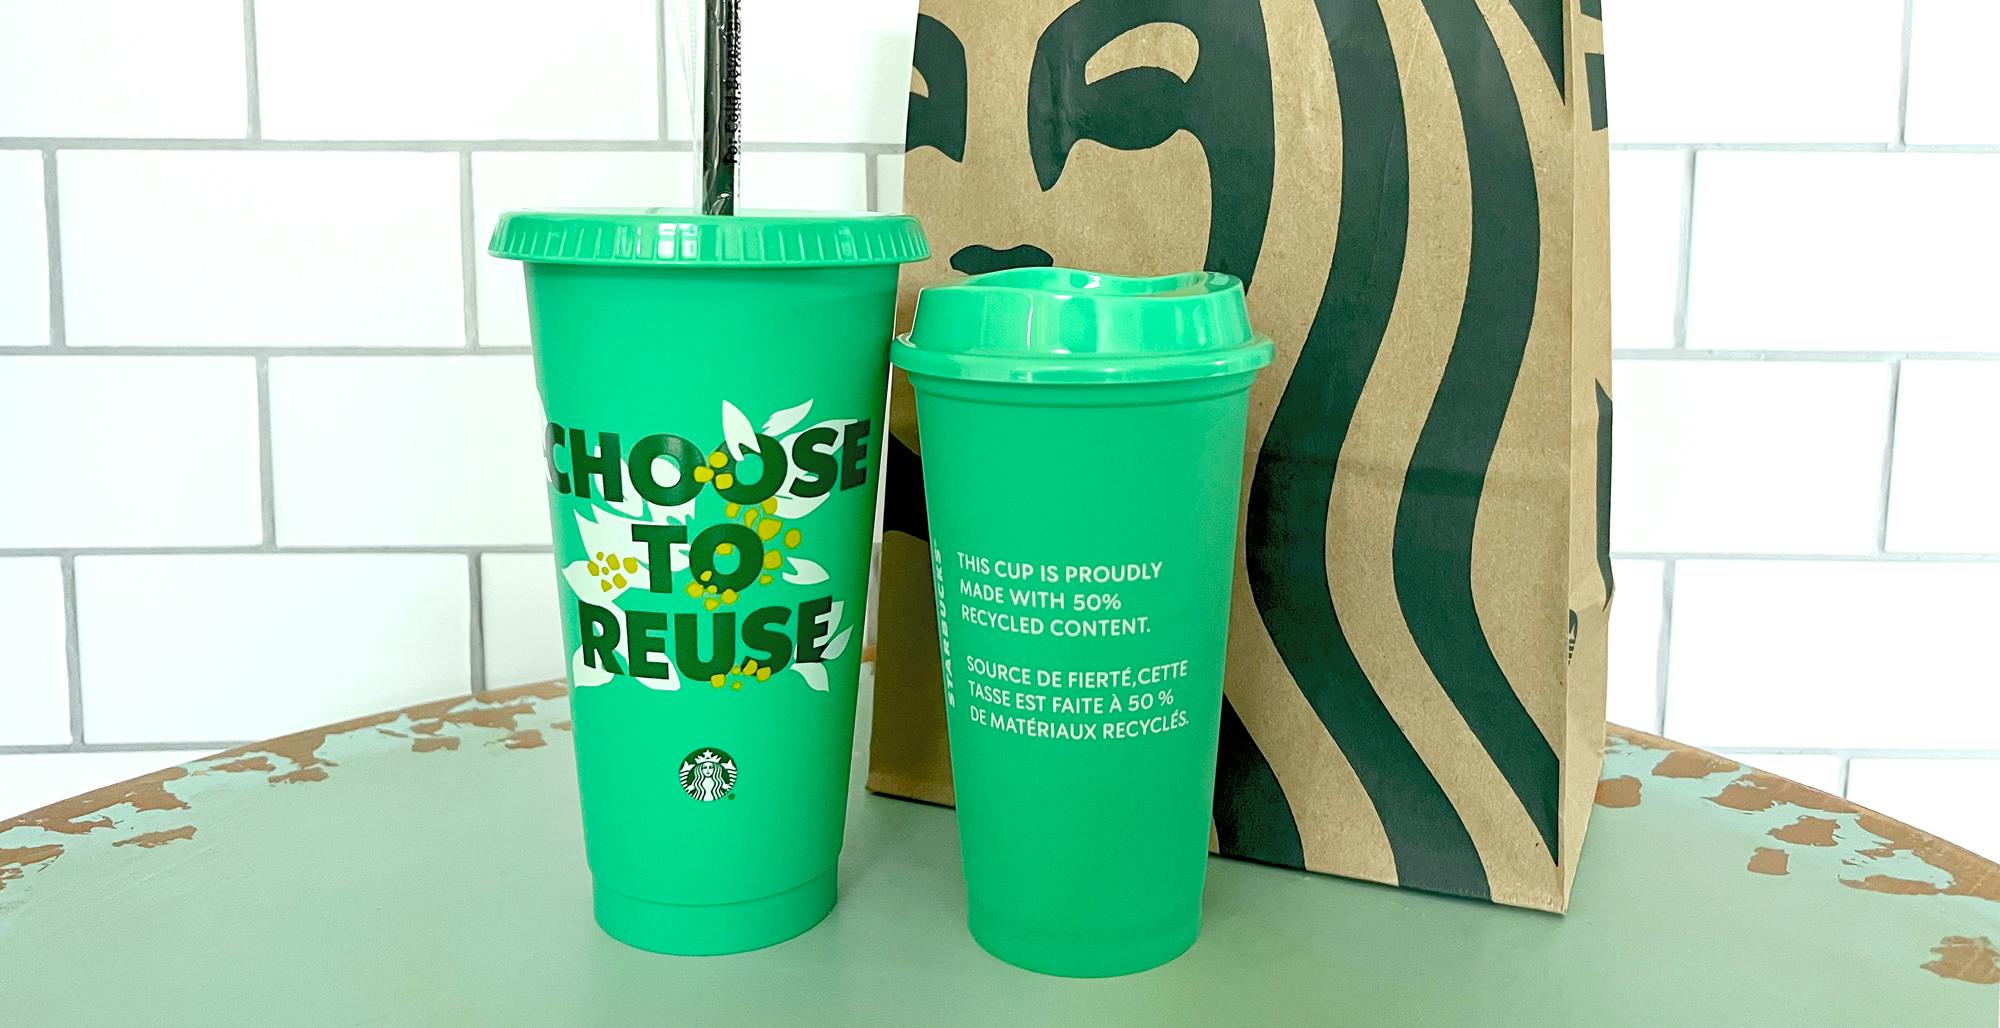 Earth Day Reusables Plastic Cold Cup - 24 fl oz: Starbucks Coffee